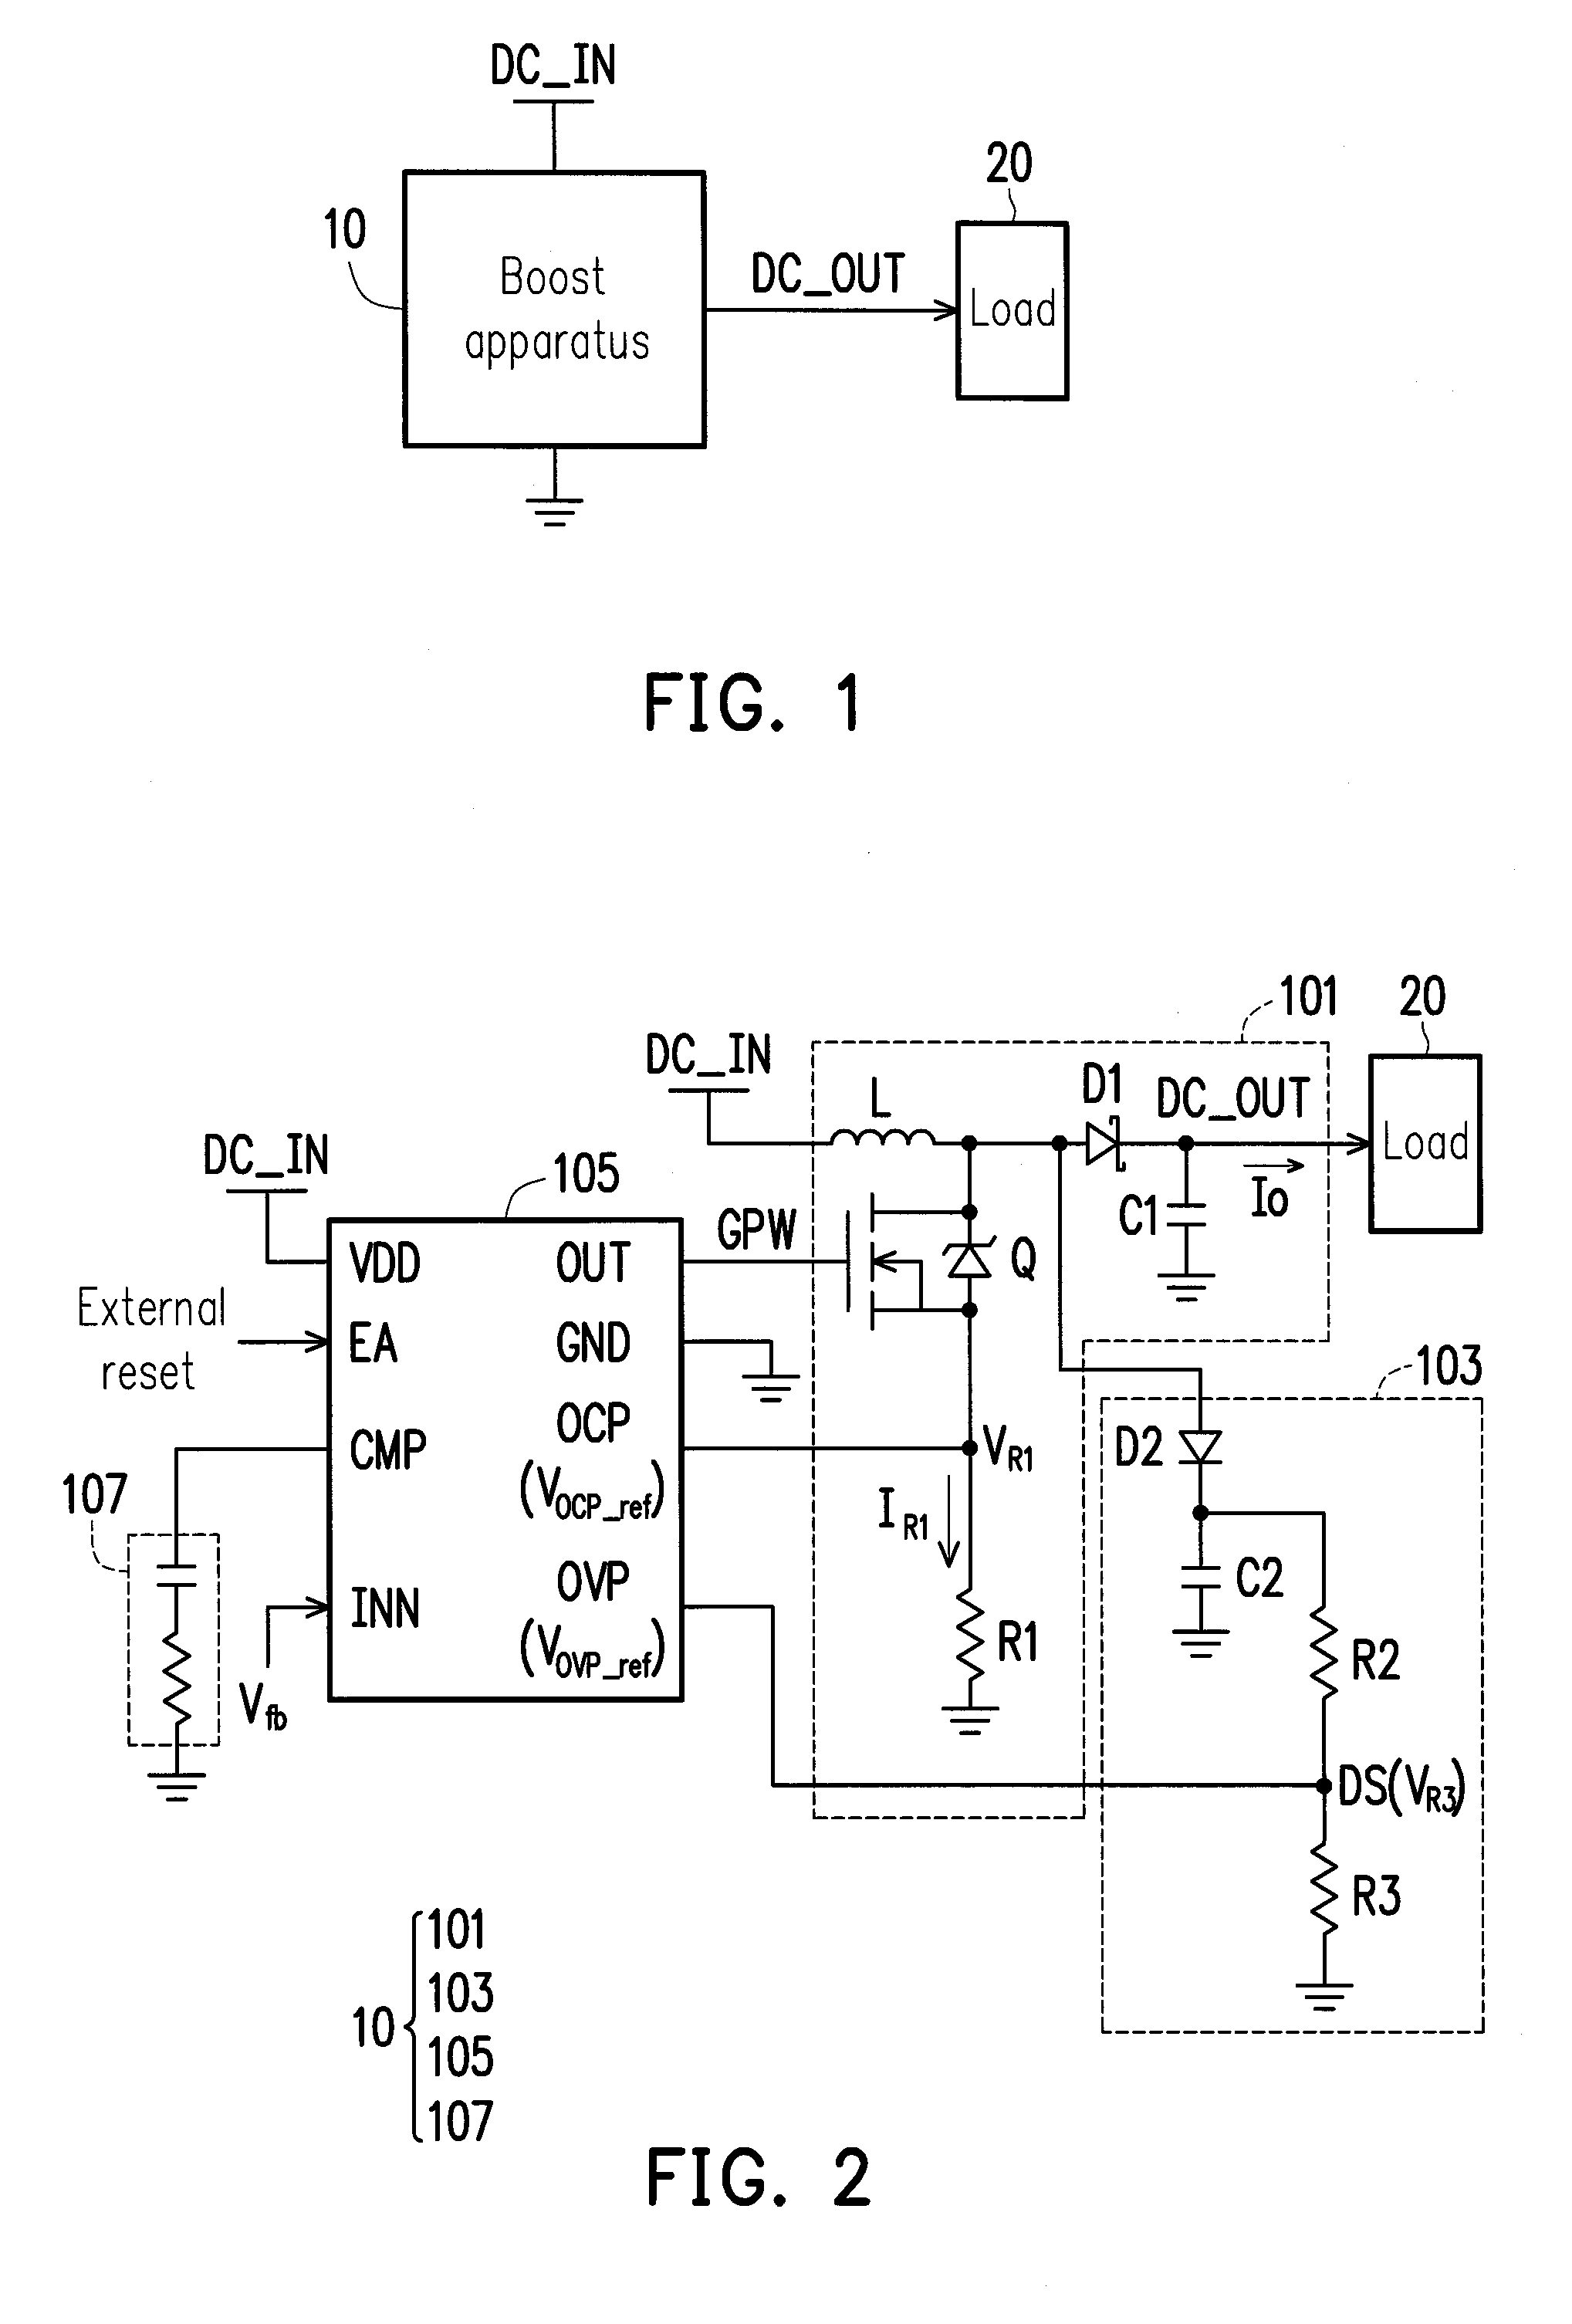 Boost apparatus with over-current and over-voltage protection function